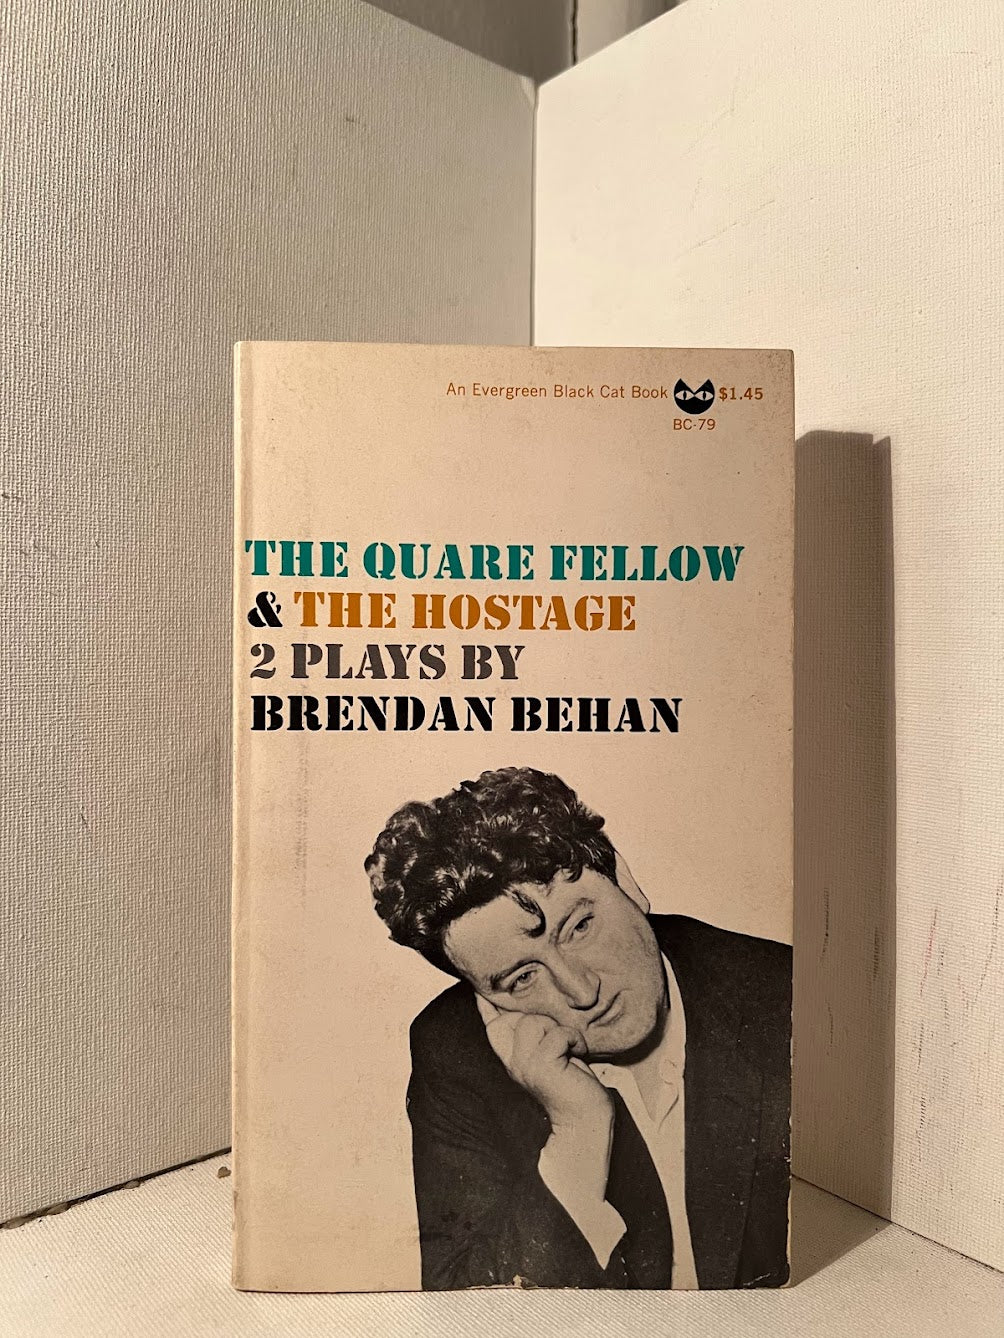 The Quare Fellow & The Hostage by Brendan Behan